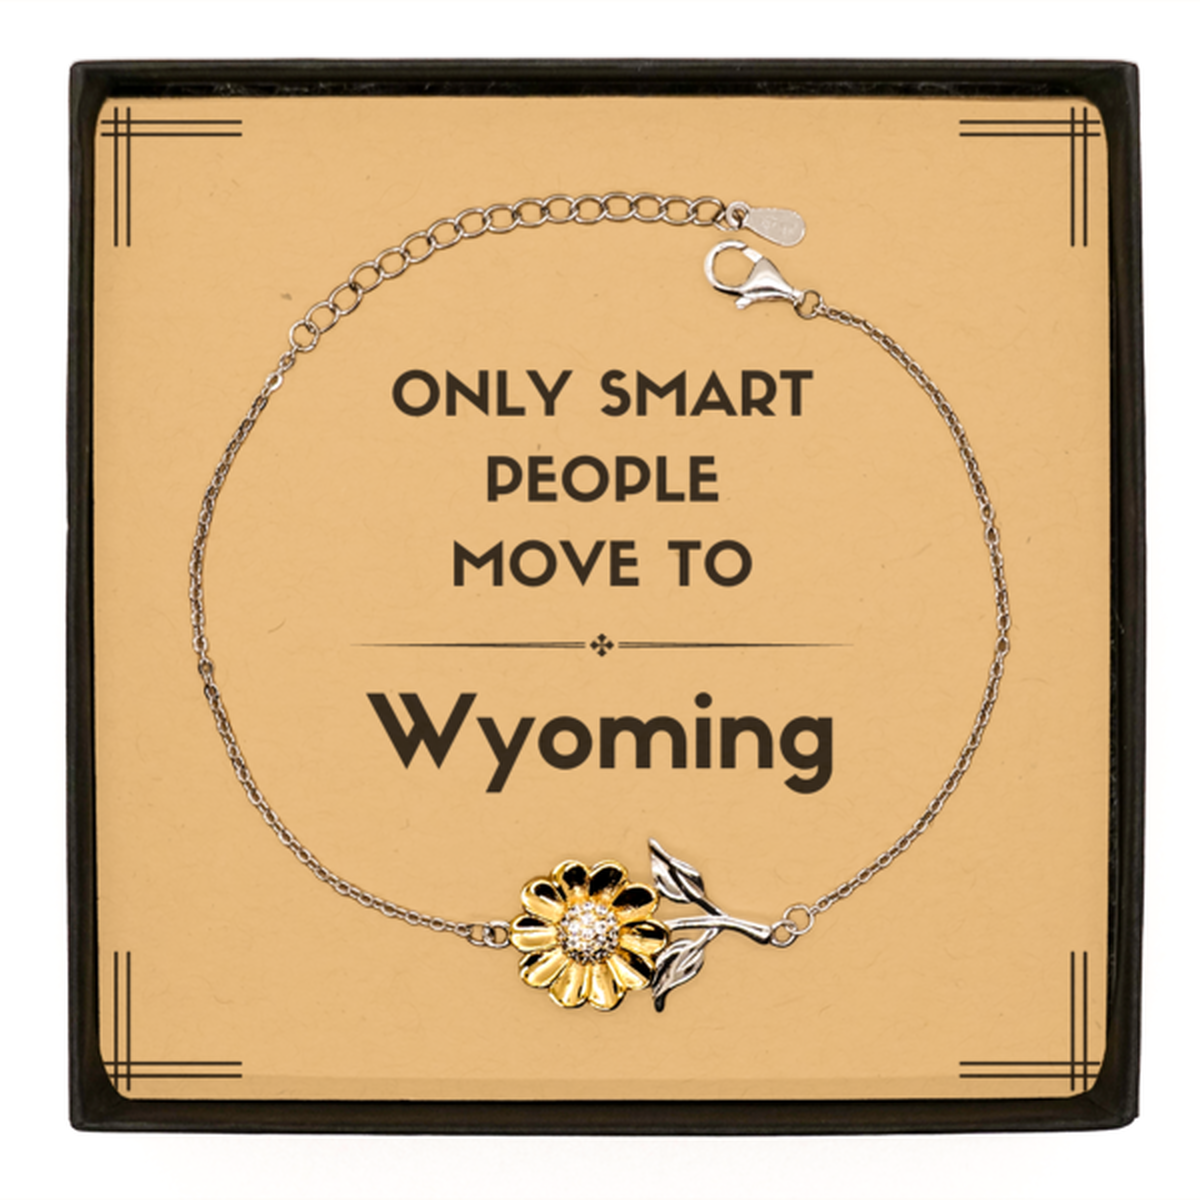 Only smart people move to Wyoming Sunflower Bracelet, Message Card Gifts For Wyoming, Move to Wyoming Gifts for Friends Coworker Funny Saying Quote